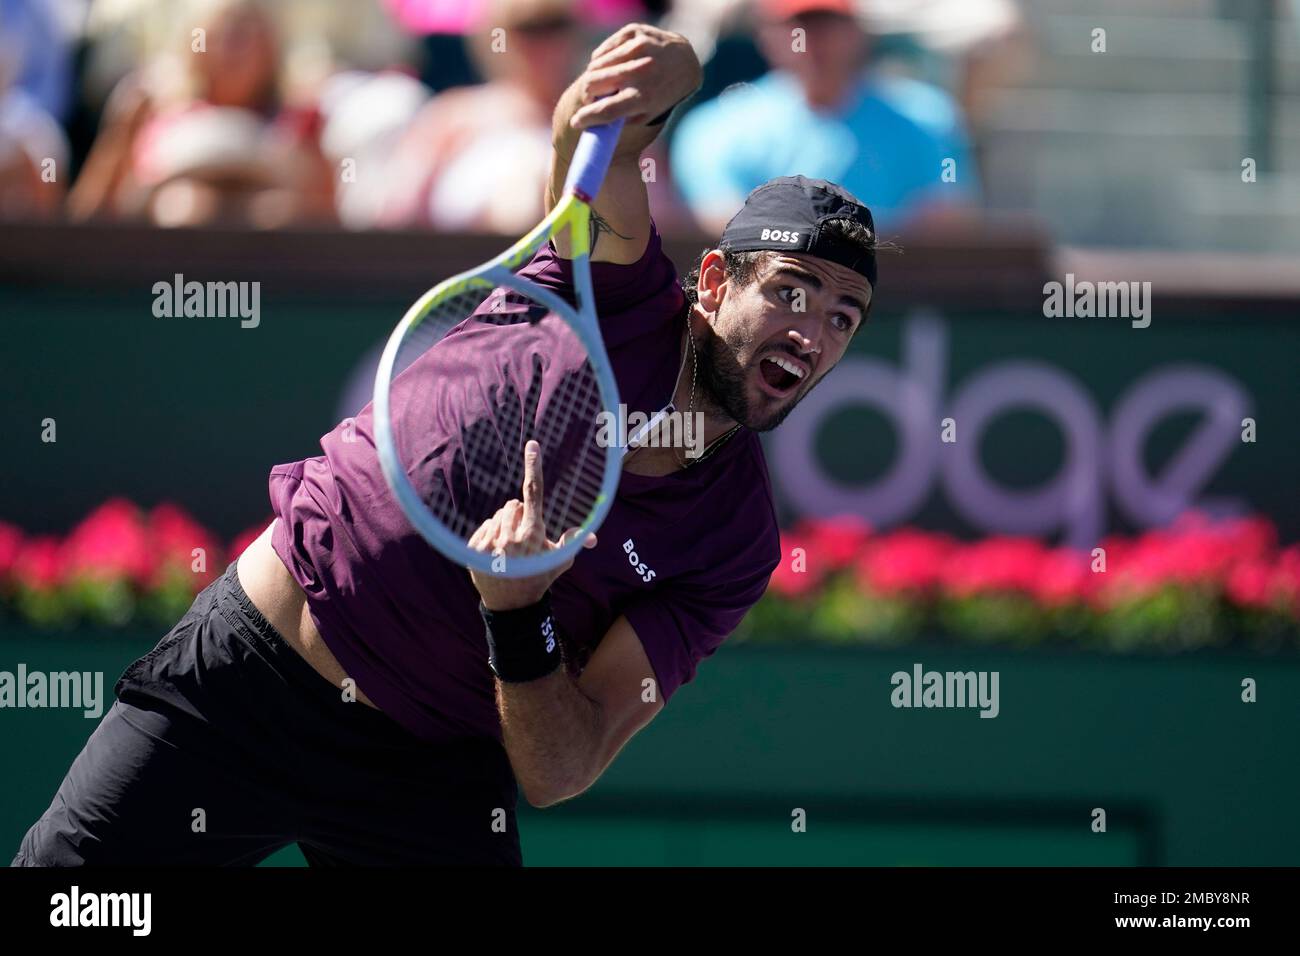 Matteo Berrettini, of Italy, serves to Lloyd Harris, of South Africa, at the BNP Paribas Open tennis tournament Tuesday, March 15, 2022, in Indian Wells, Calif